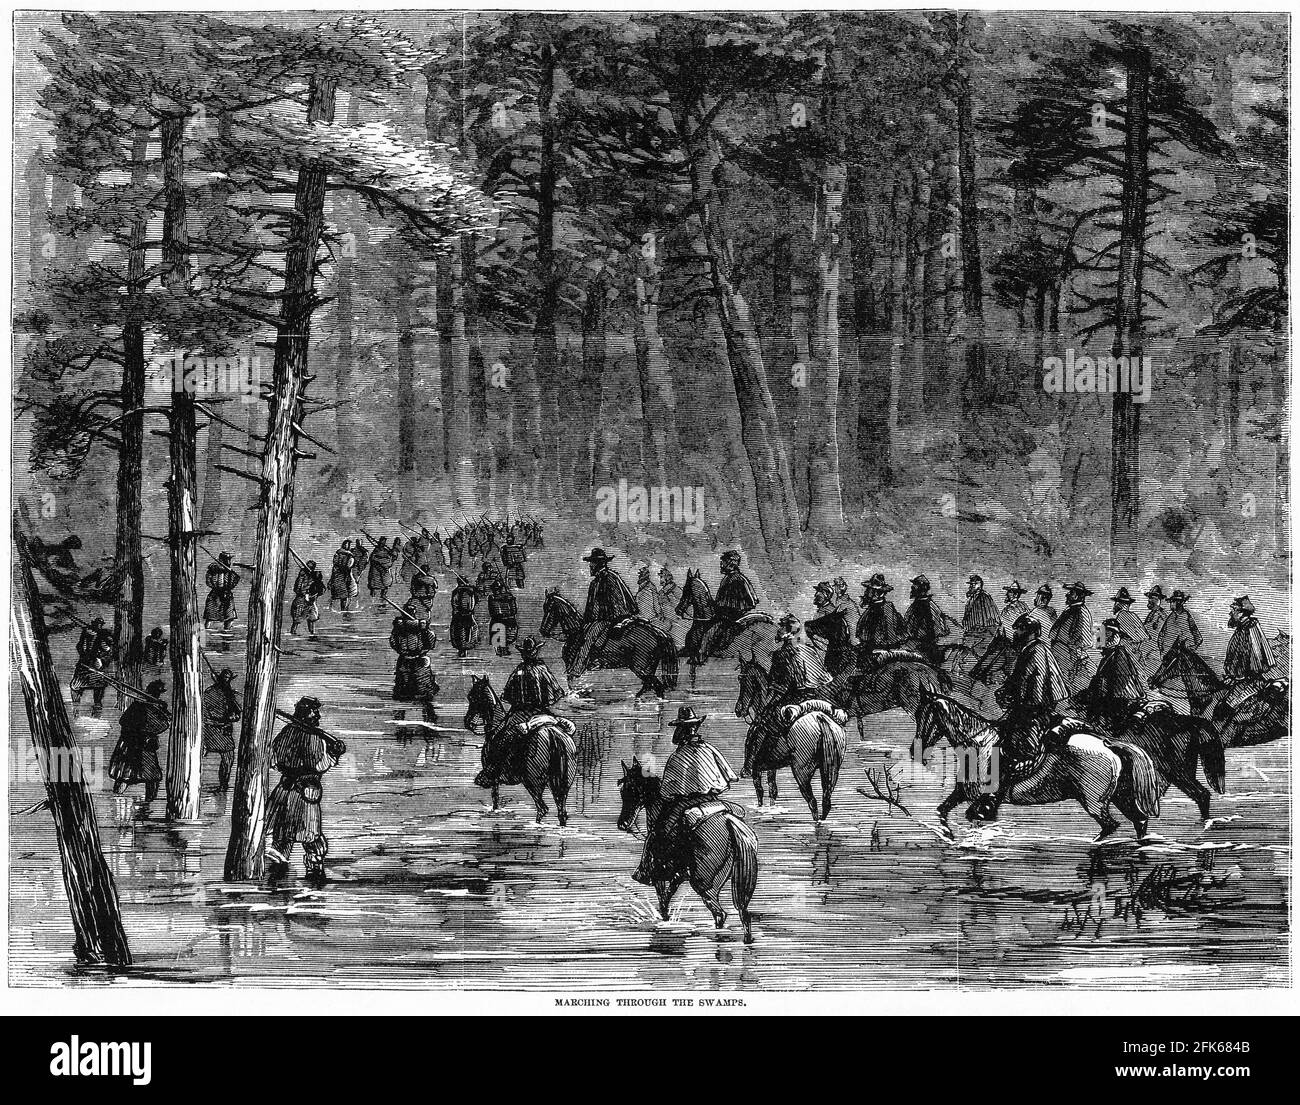 Engraving of Union soldiers marching through a swamp during the American civil war: Stock Photo